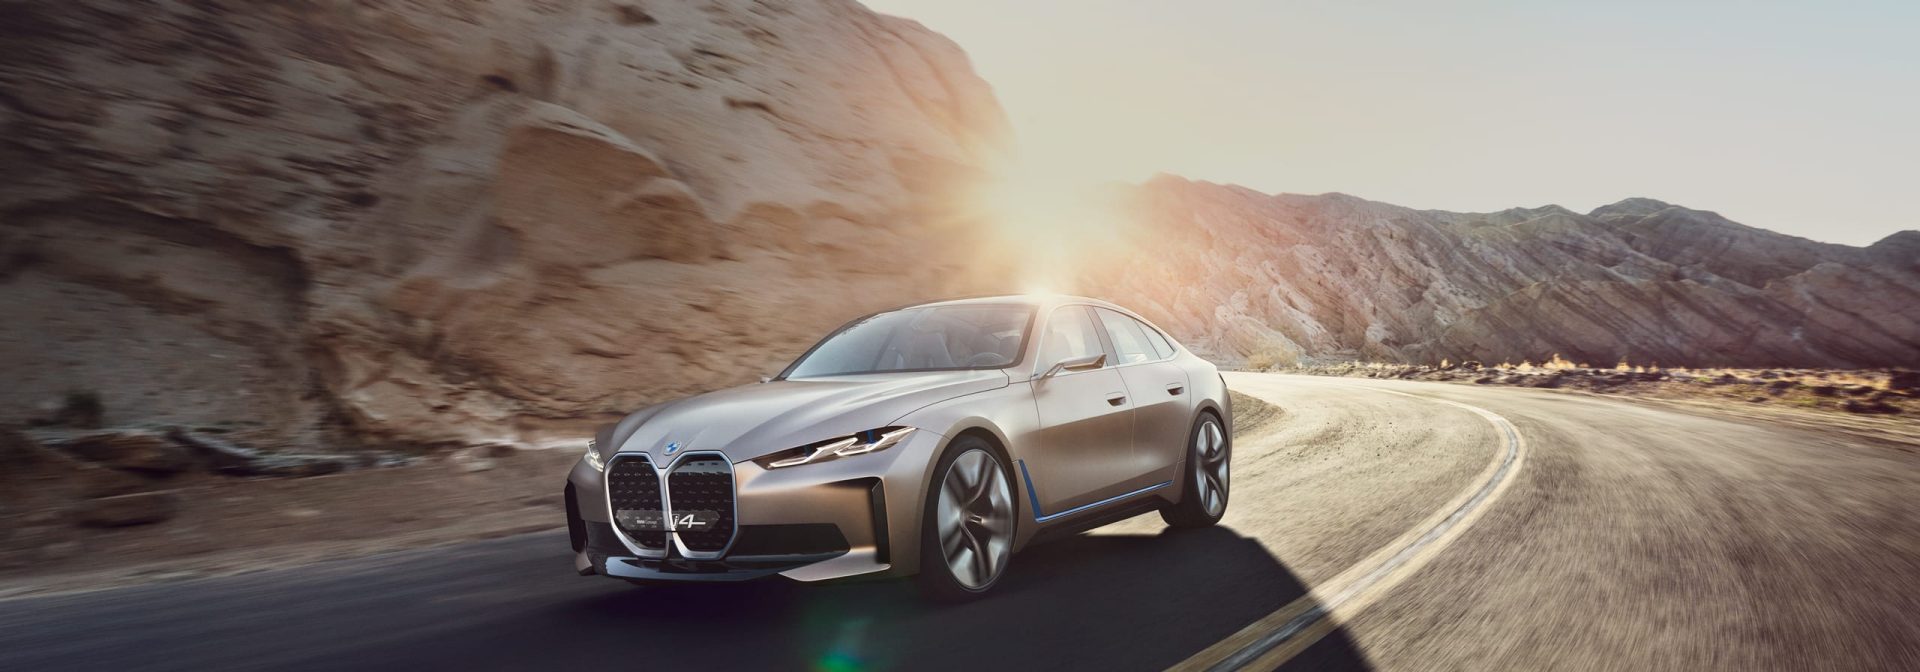 The BMW Concept i4 in a landscape